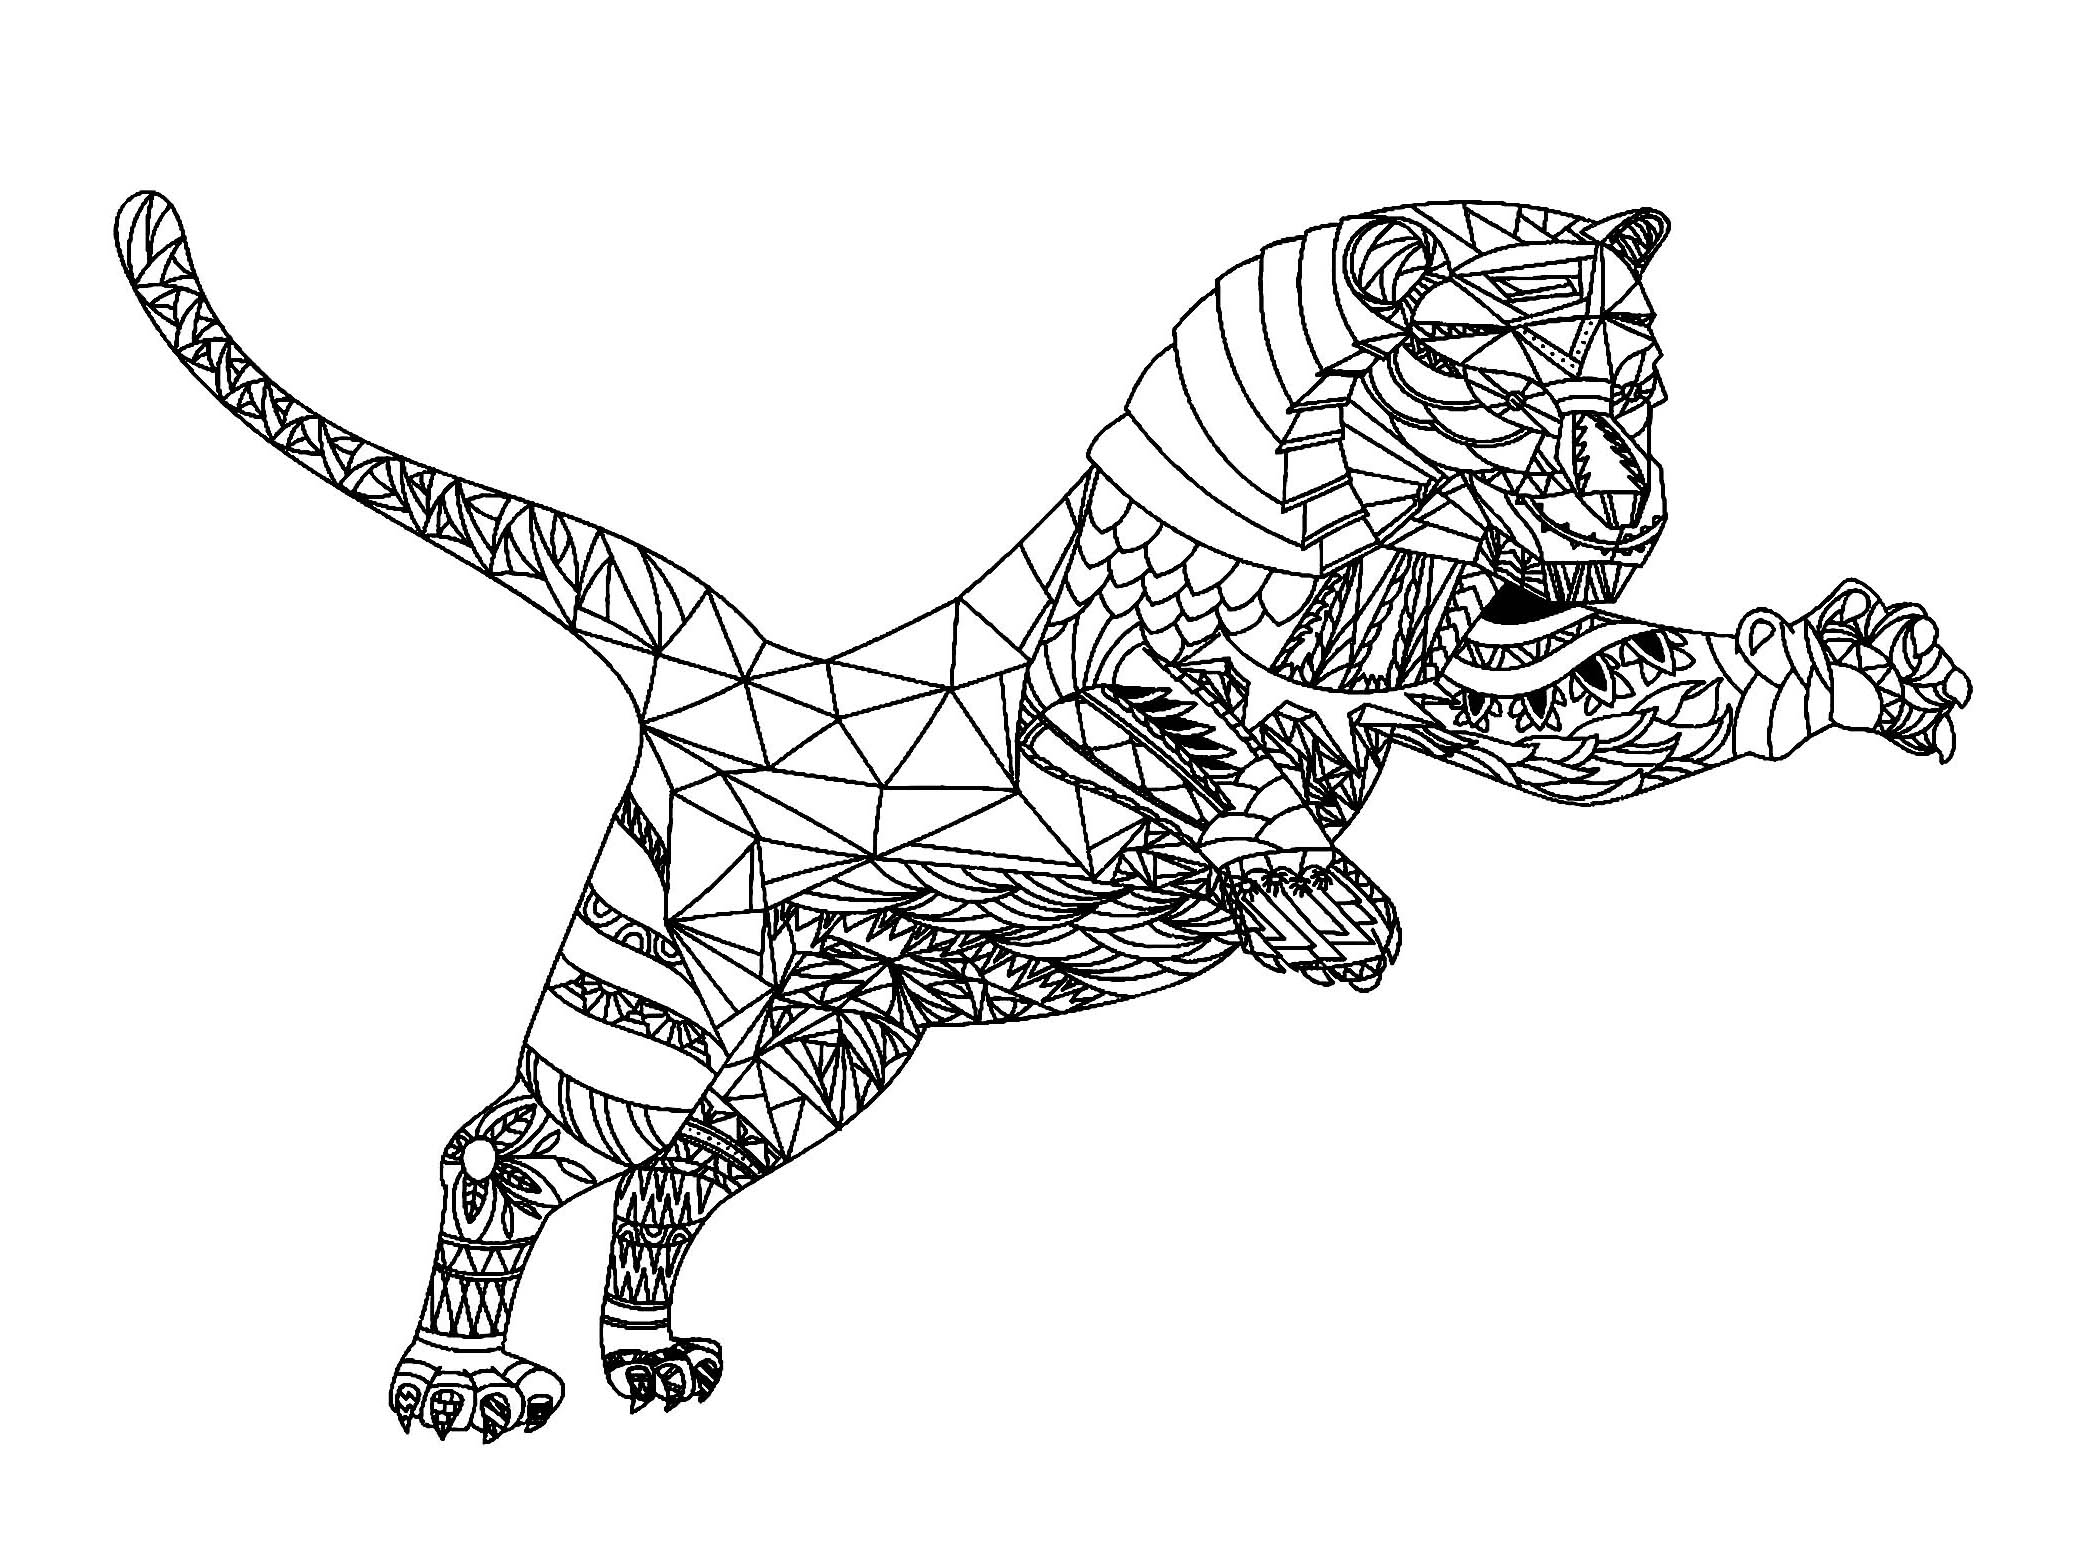 Tigers to download for free - Tigers Kids Coloring Pages